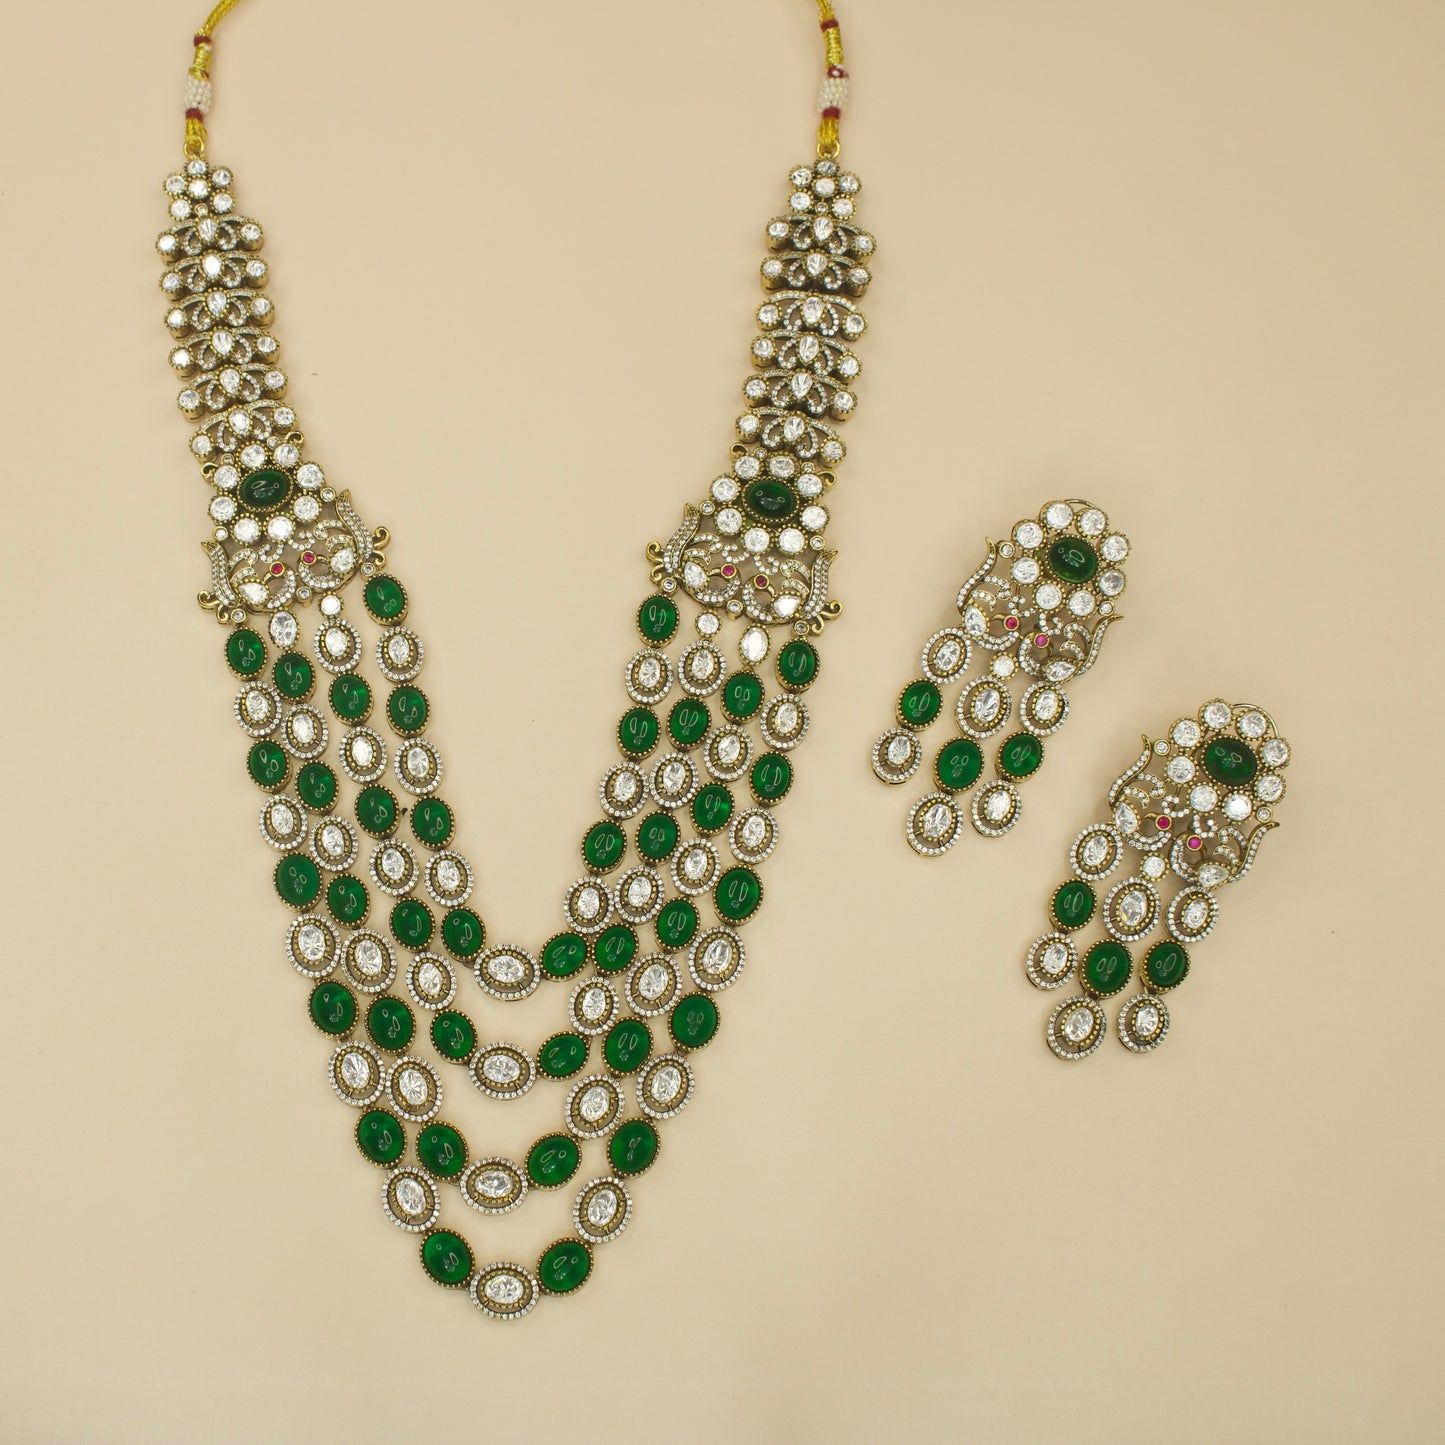 Classic Victorian Layered Necklace Set with peacock motifs, AD stone, & matching earrings. This Victorian Jewellery is available in a Green colour variant. 